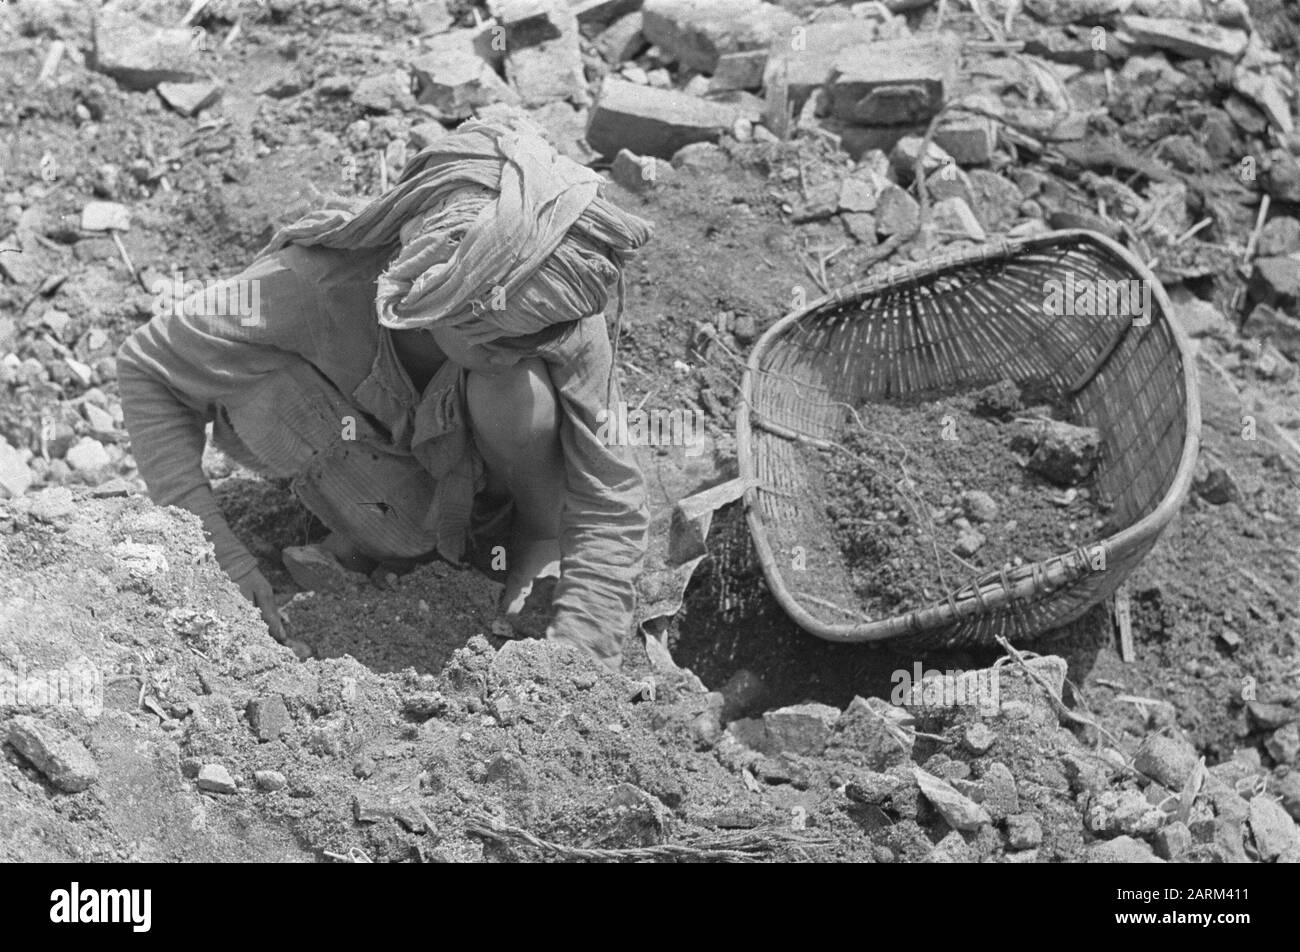 Photo Reportage Palembangs  Destroyed bank building. Debris is searched in search of remnants of coins or banknotes. Boy with headscarf Date: January 1947 Location: Indonesia, Dutch East Indies, Palembangs, Sumatra Stock Photo